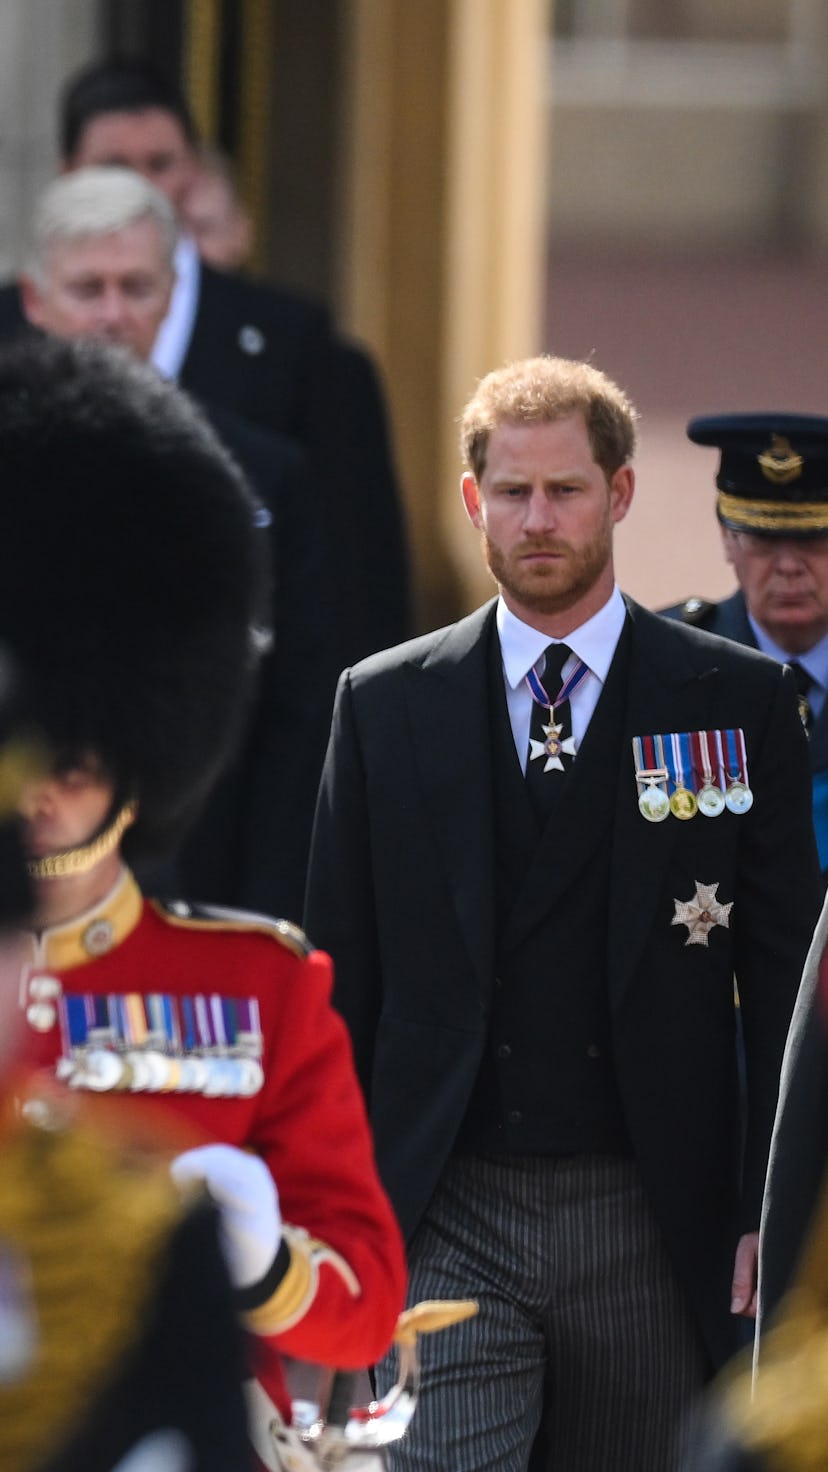 King Charles III, Prince William, Prince of Wales and Prince Harry, Duke of Sussex attended Queen El...